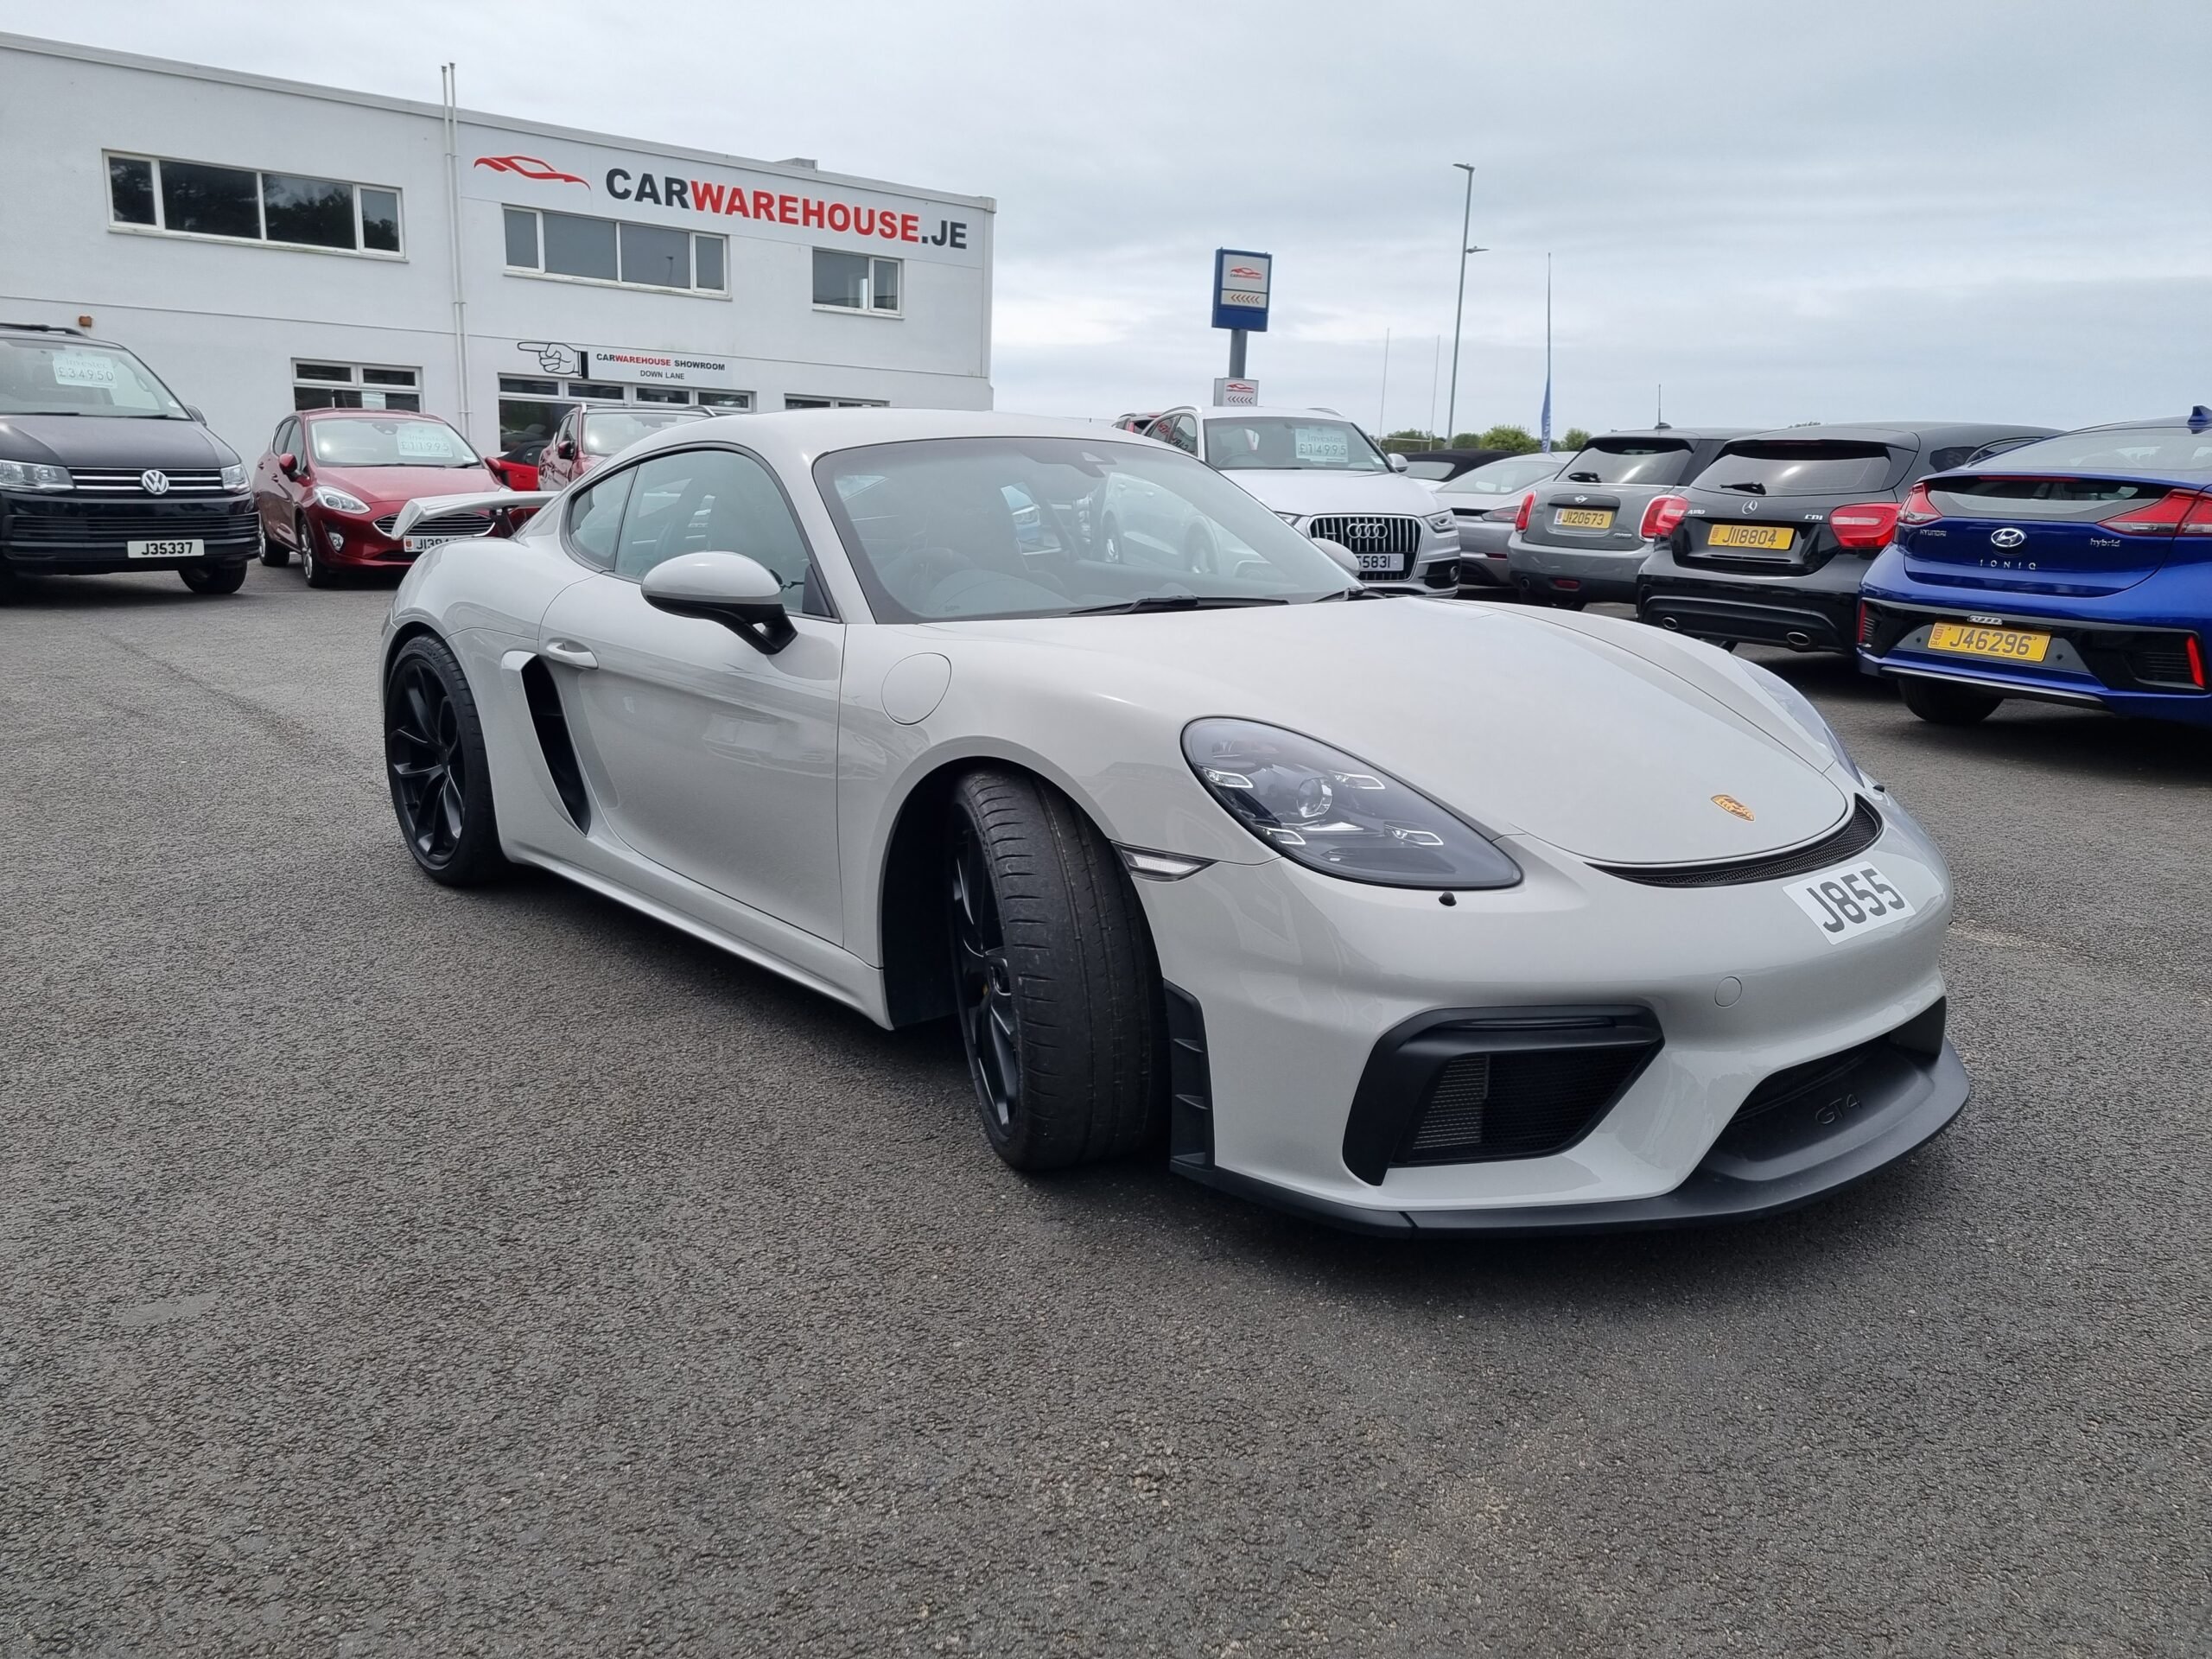 2020 Porsche Cayman Gt4 Club Sport 40 Coupe Only 1700 Miles18100 Worth Of Factory Options 8